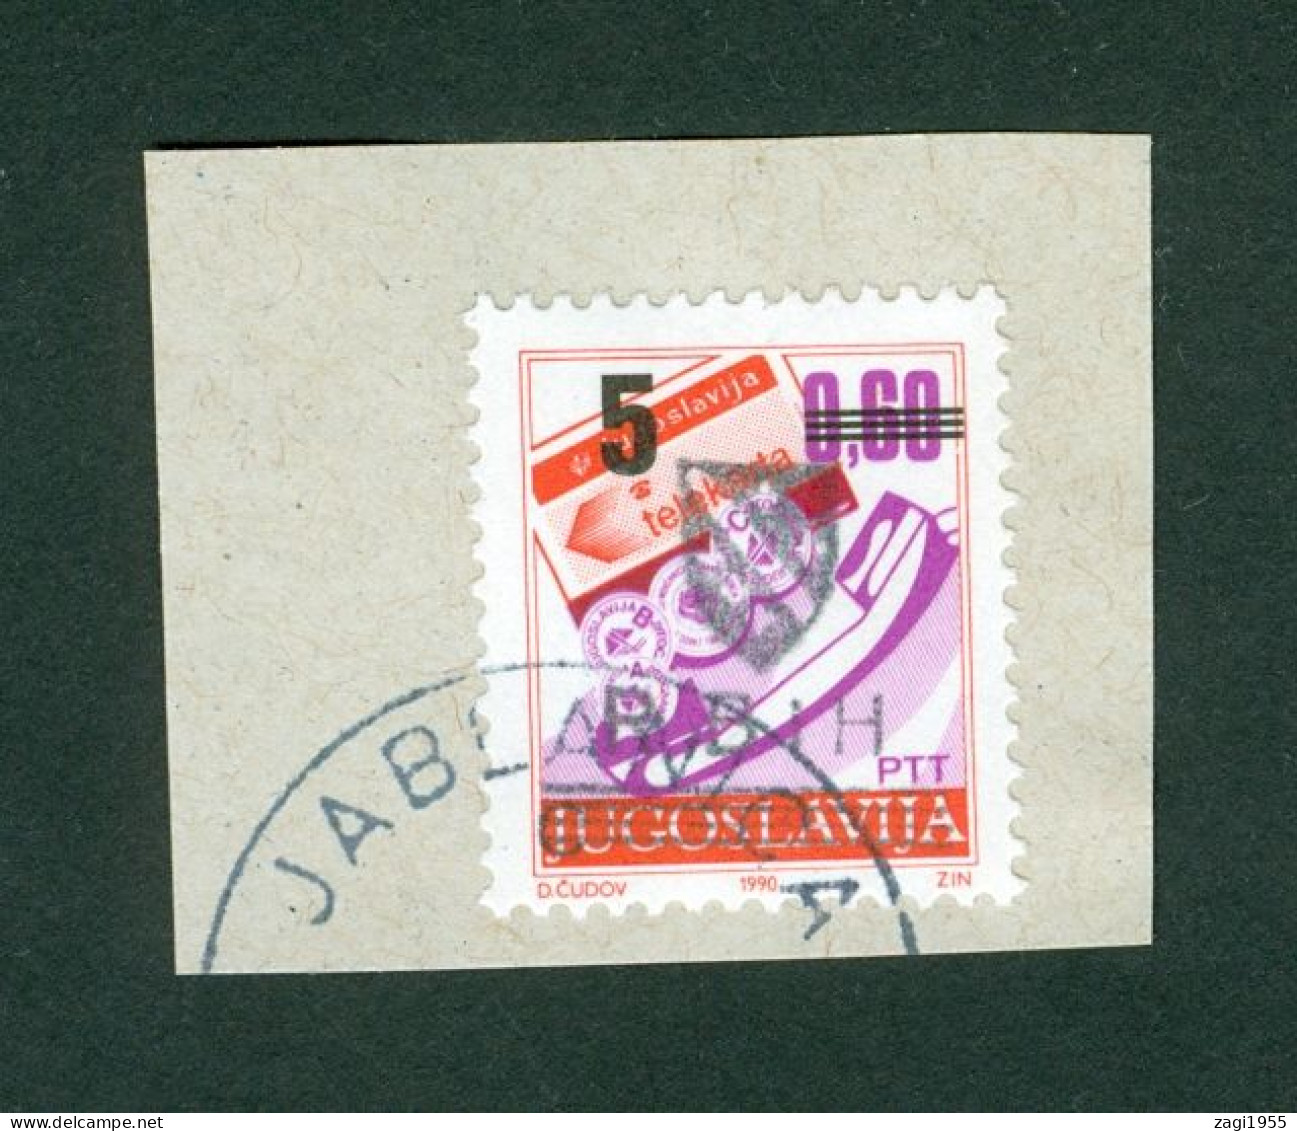 Bosnia And Herzegovina 1994 Local Ost East Mostar Overprint Provisional BH Post Sarajevo Mich. 4 First Issue BiH - Bosnia And Herzegovina